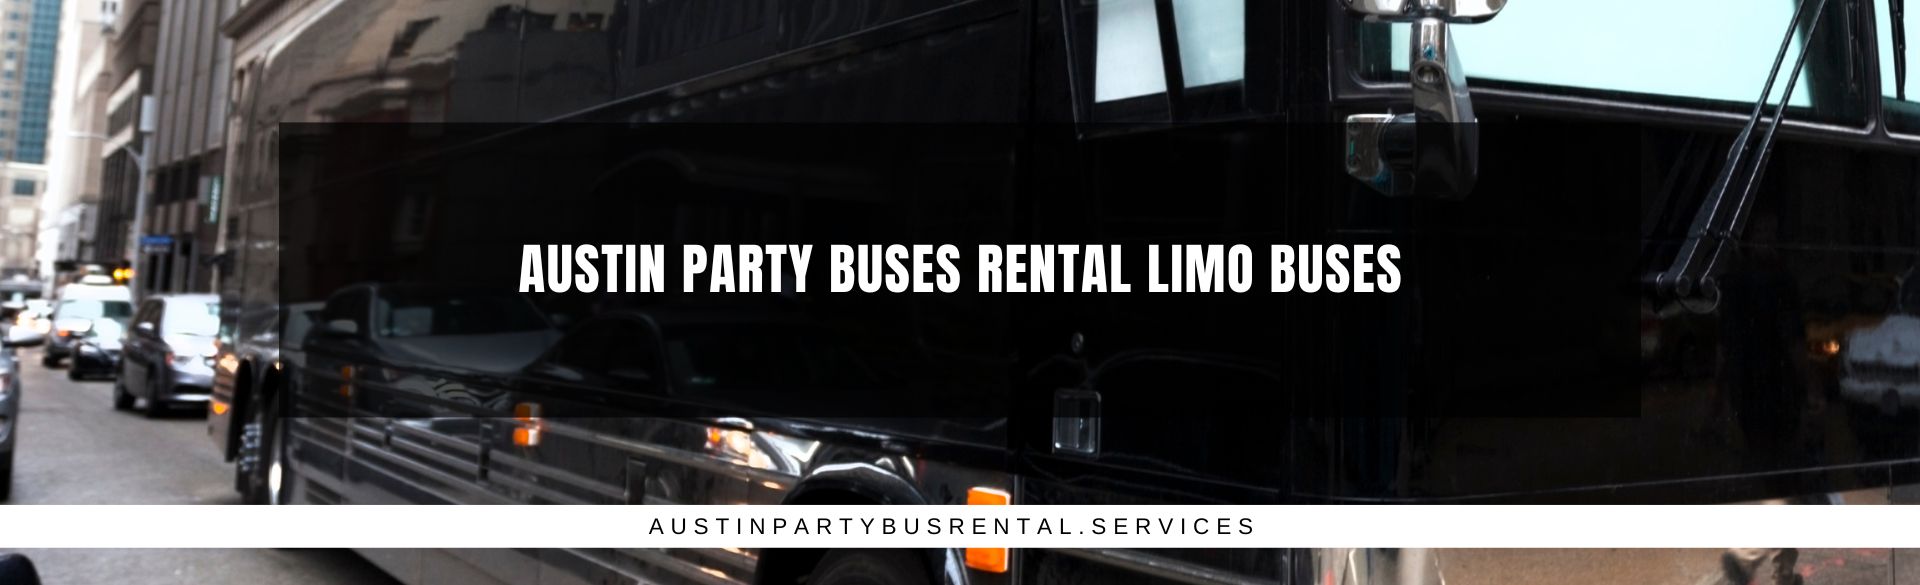 Austin Party Buses Rental Limo Buses